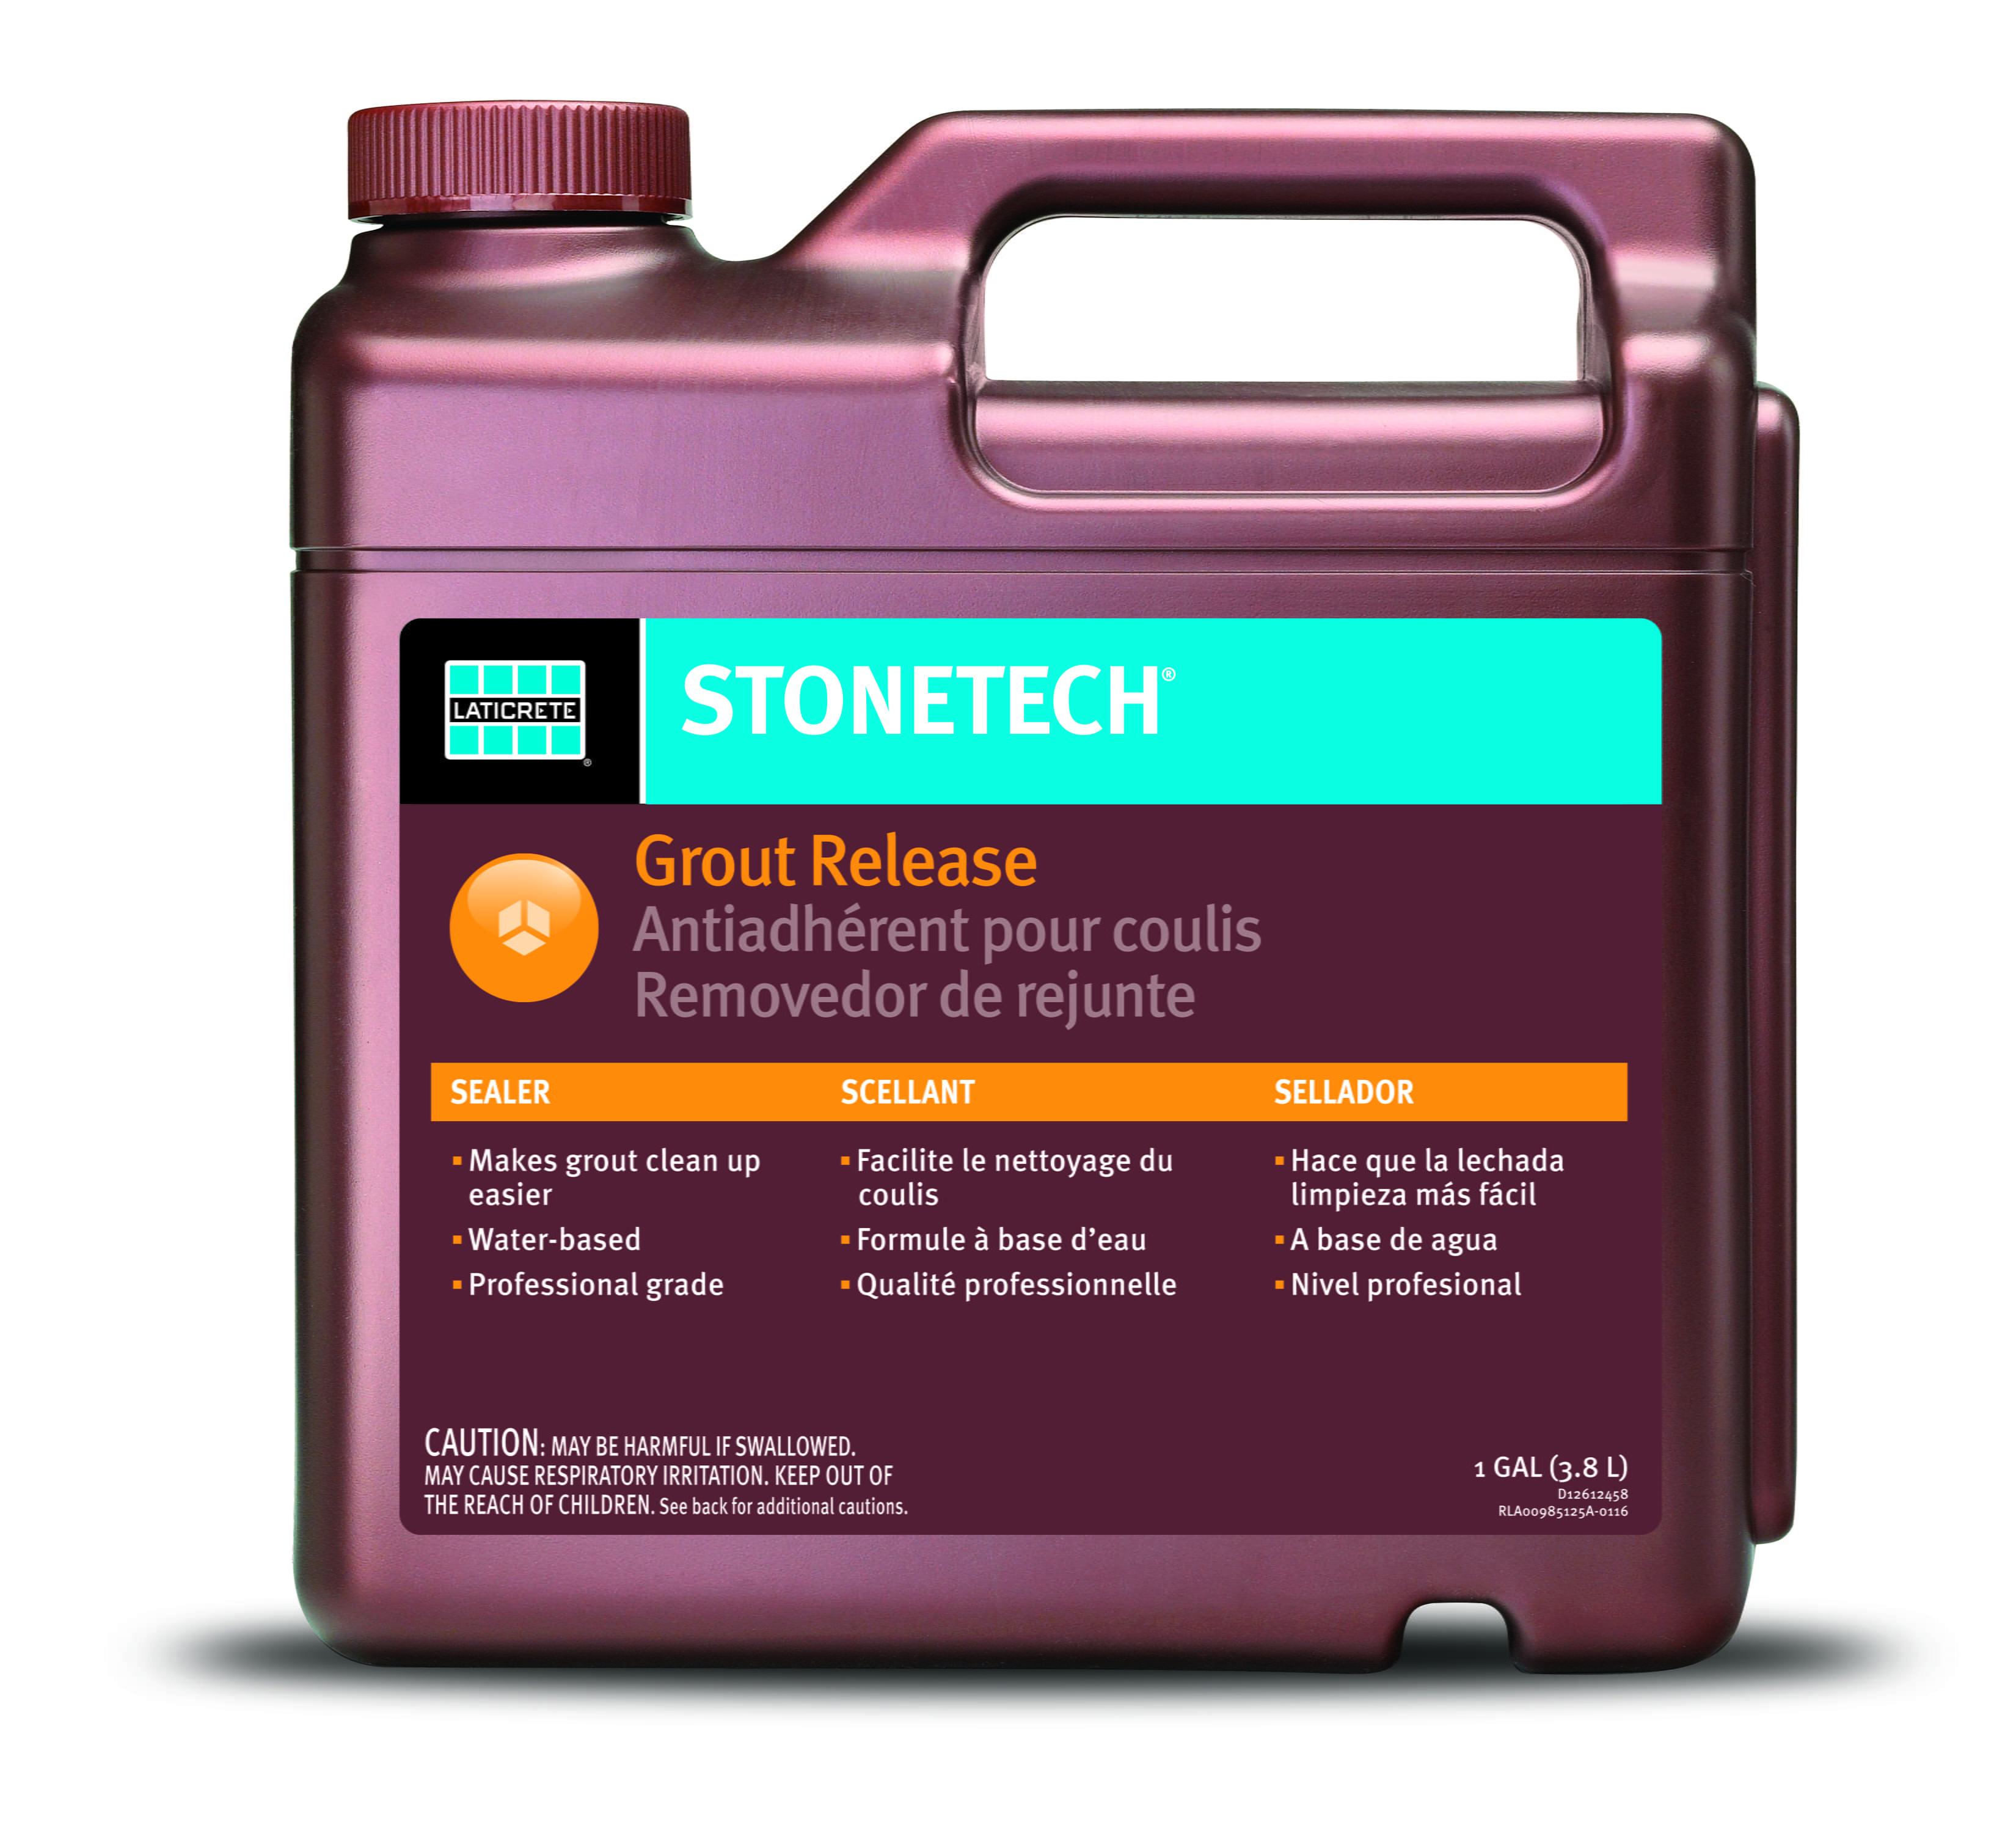 STONETECH Grout Release